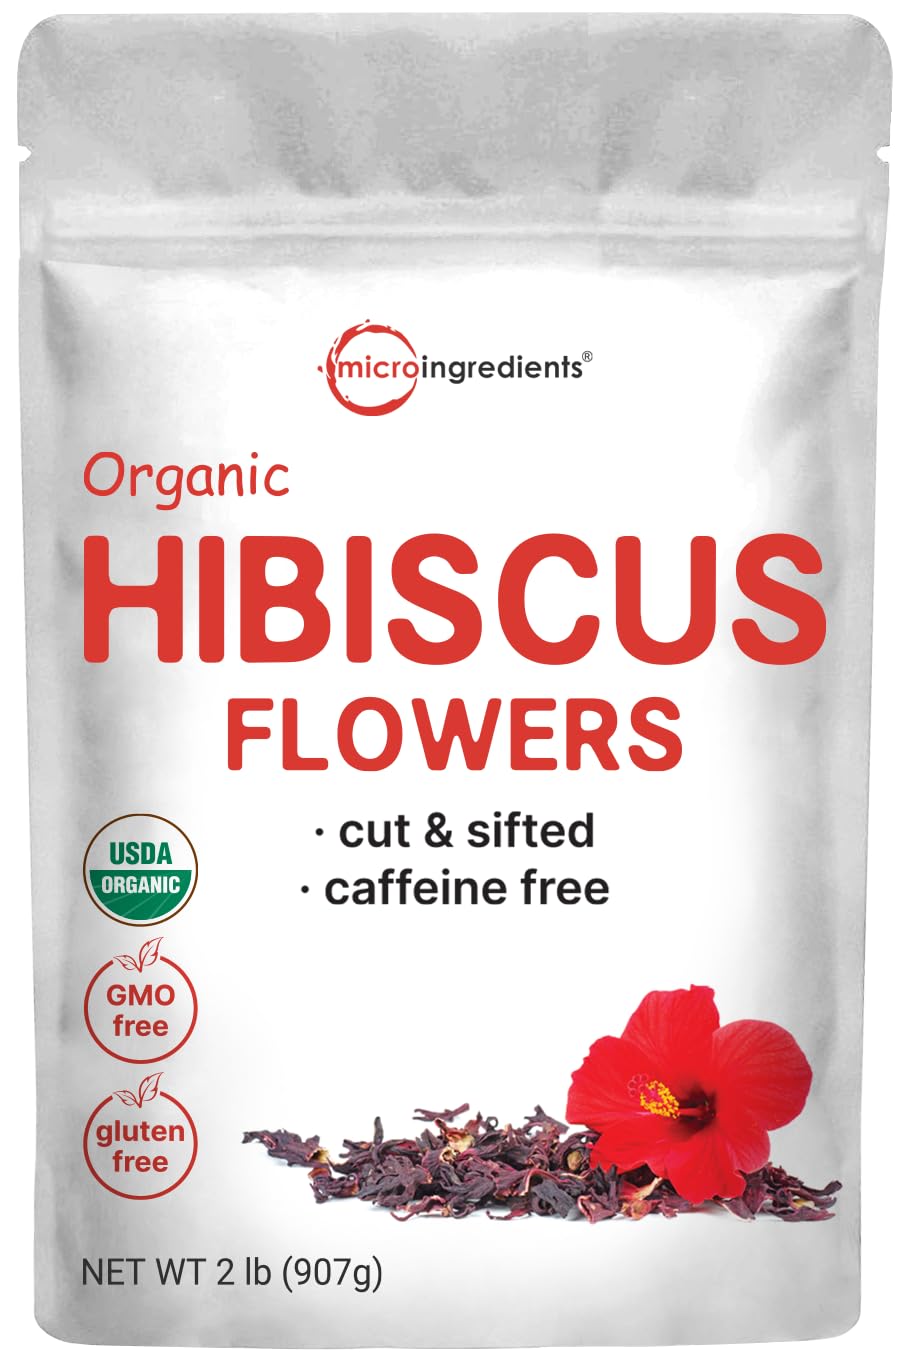 Organic Hibiscus Flowers, 2lbs | Flor de Jamaica, Loose Leaf Flower Source for Tea Bags | Cut & Sifted Dried Leaves | Great for Iced or Hot Brewed Herbal Tea | Caffeine Free, Non-GMO, No Sugar